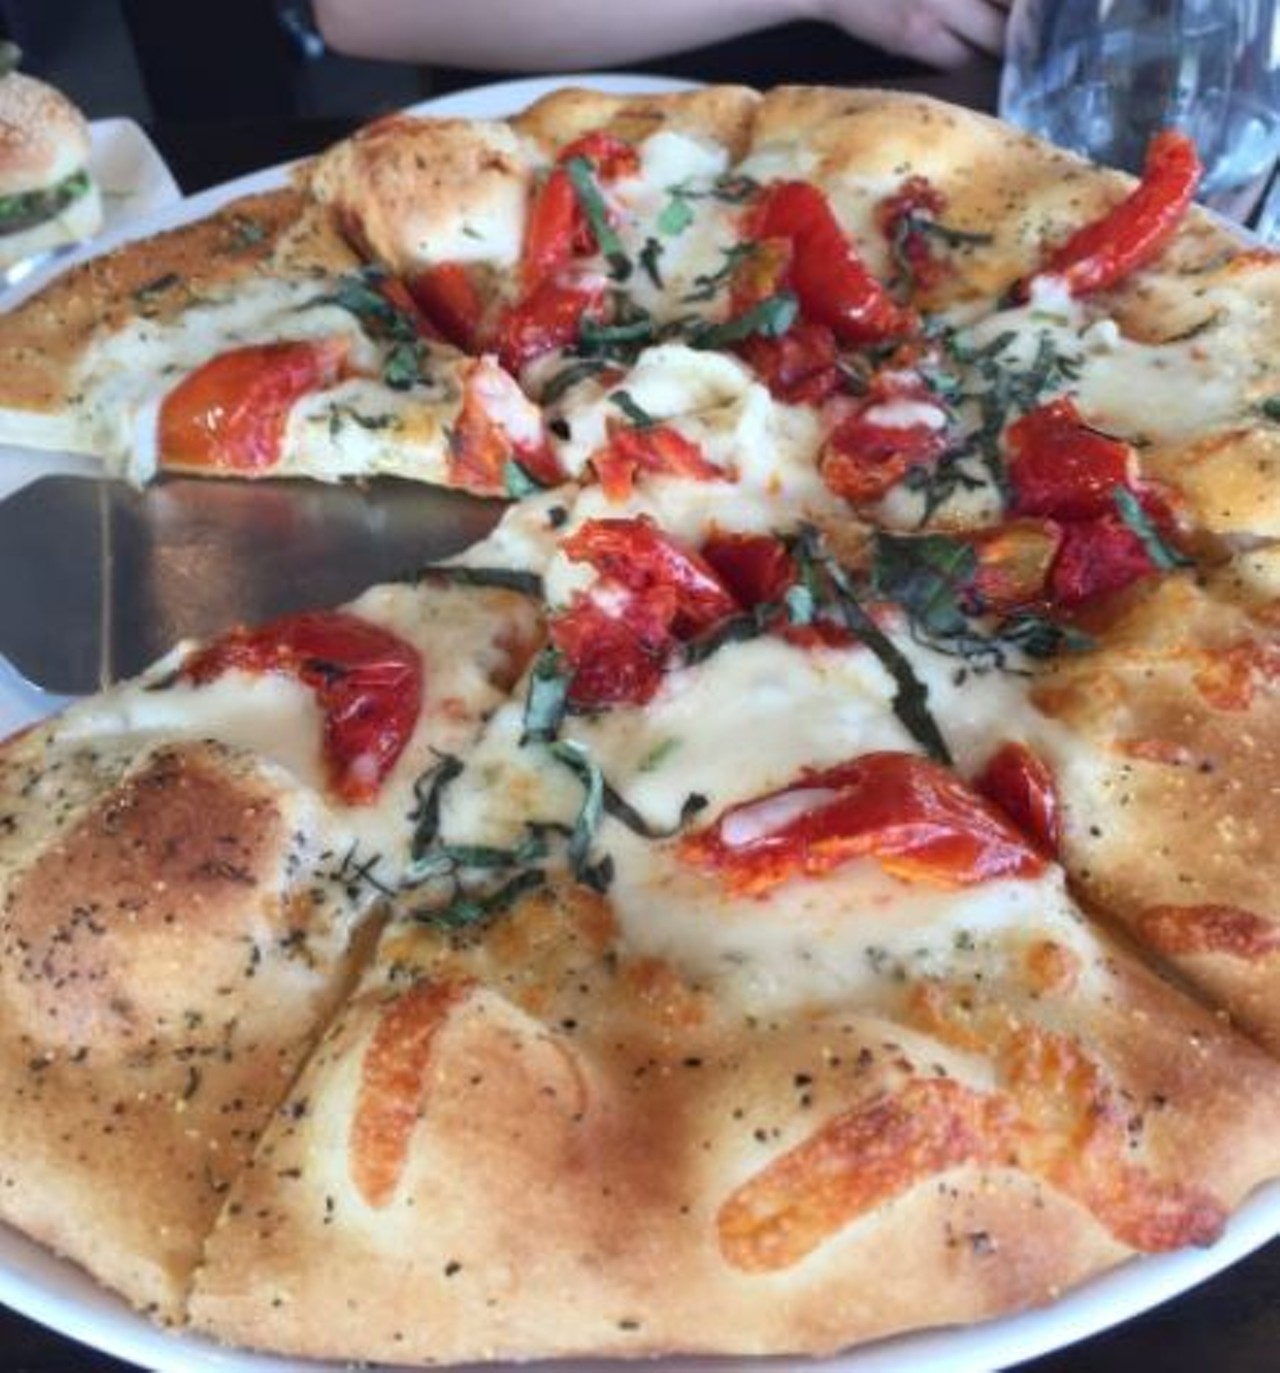 What to order - Pizza Wheel
Get the classic Margherita Pizza, at 14 dollars it's filled with the fresh basics of roasted tomato, fresh burrata cheese, fresh basil and extra virgin olive oil. 
Photo via Jadranka H. 